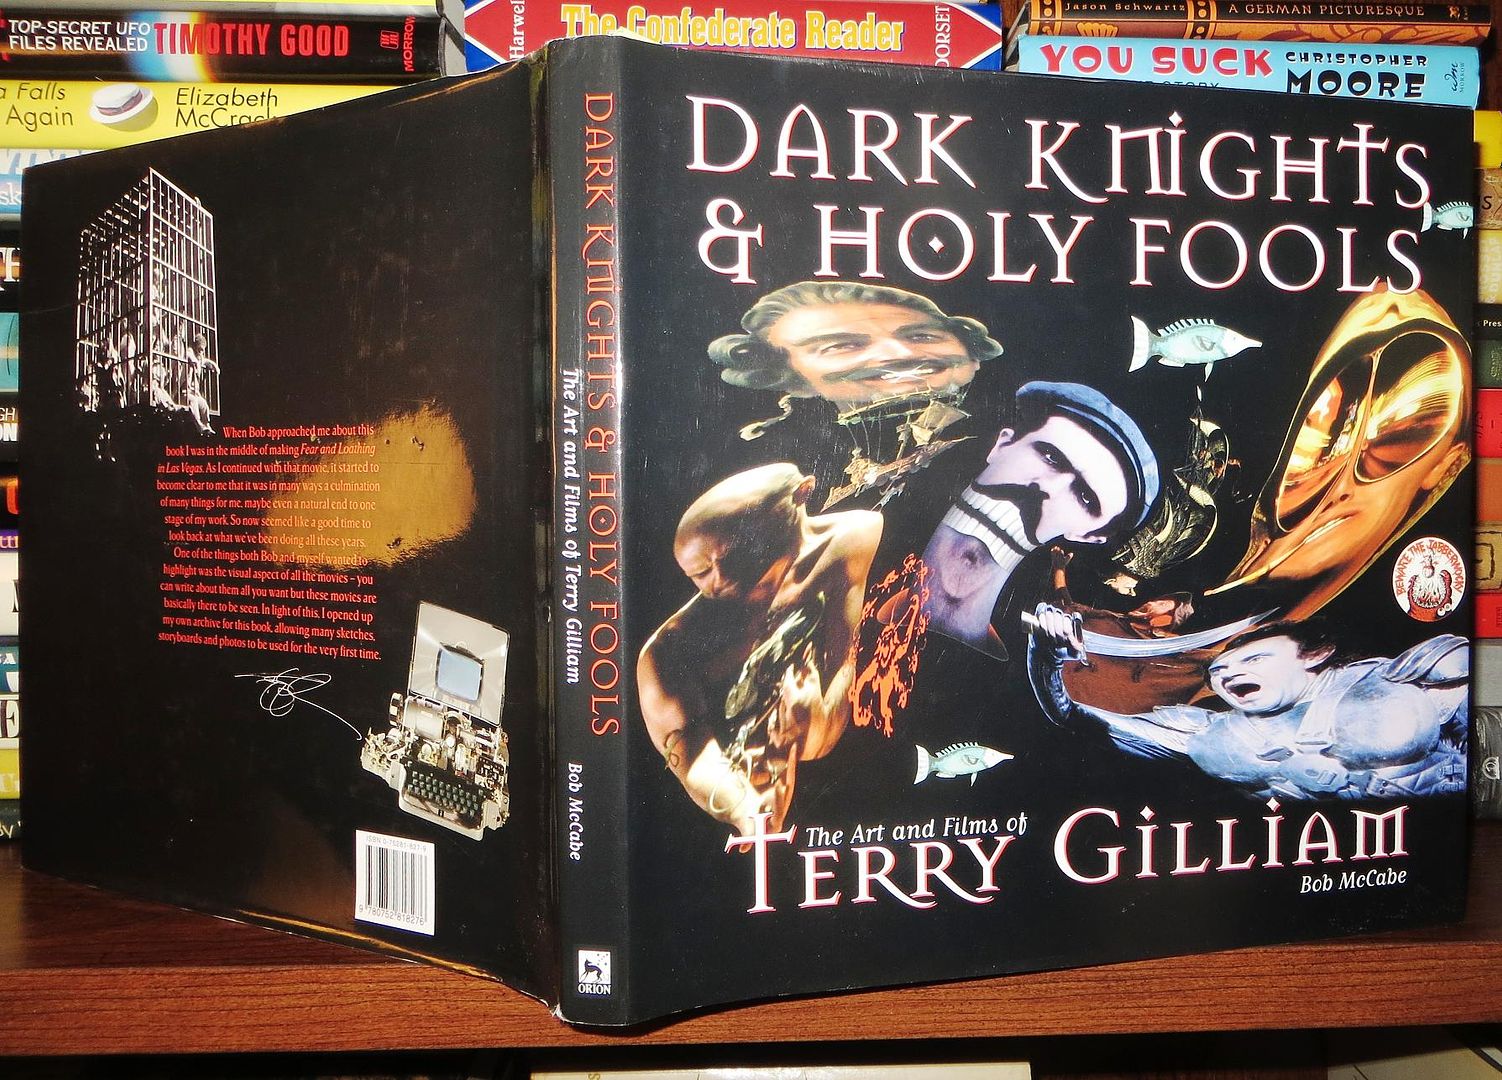 MCCABE, BOB & TERRY GILLIAM - Dark Knights & Holy Fools the Art and Films of Terry Gilliam